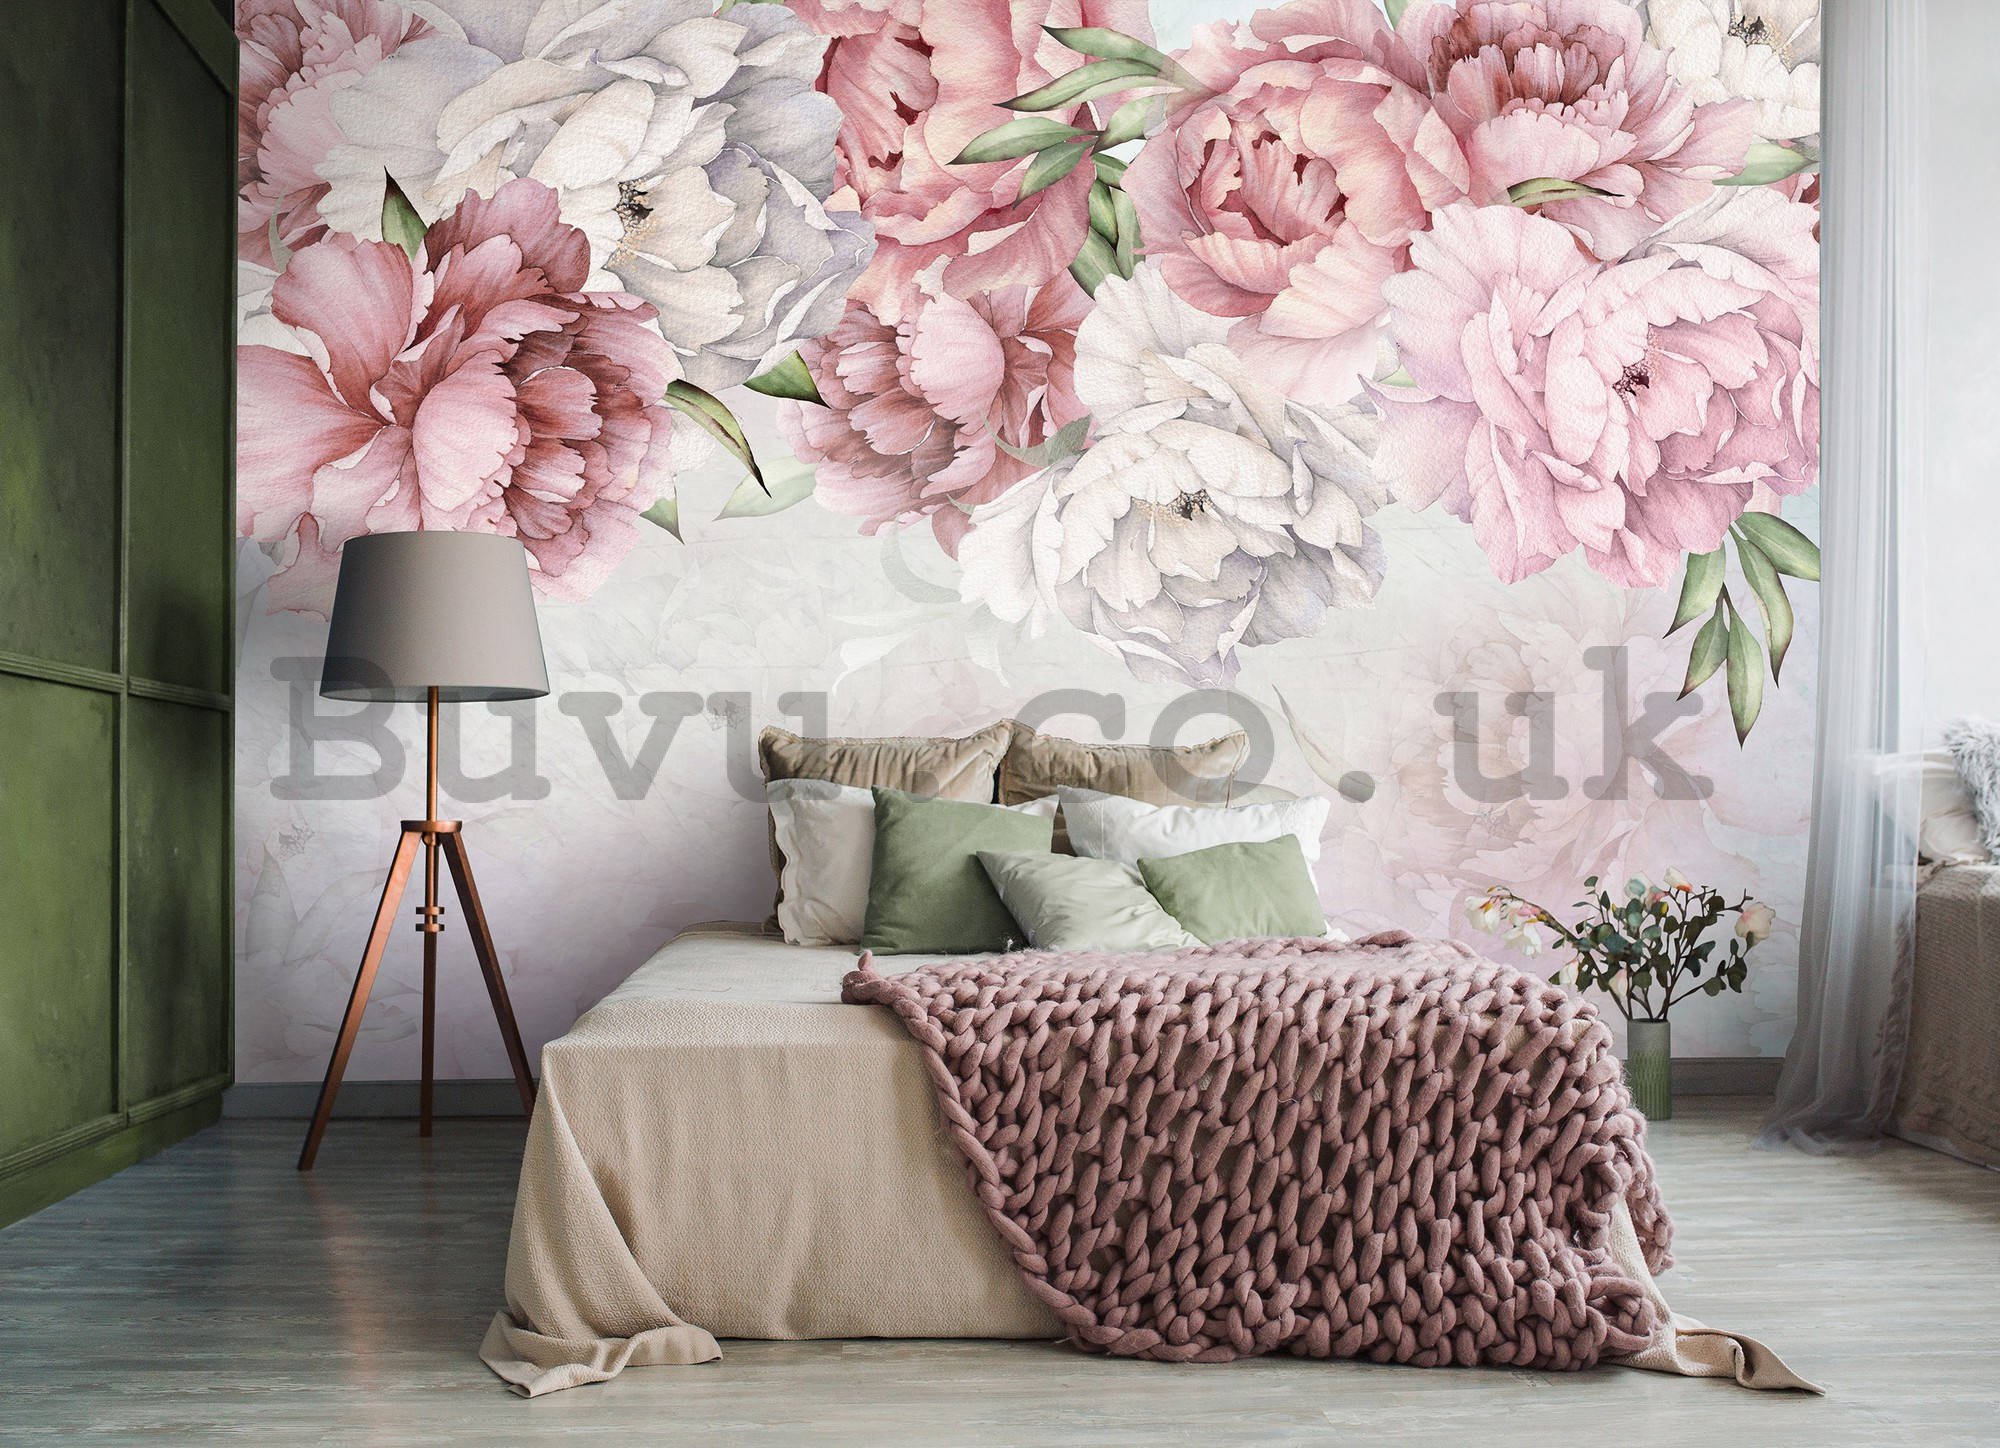 Wall mural vlies: White and pink roses - 416x254 cm